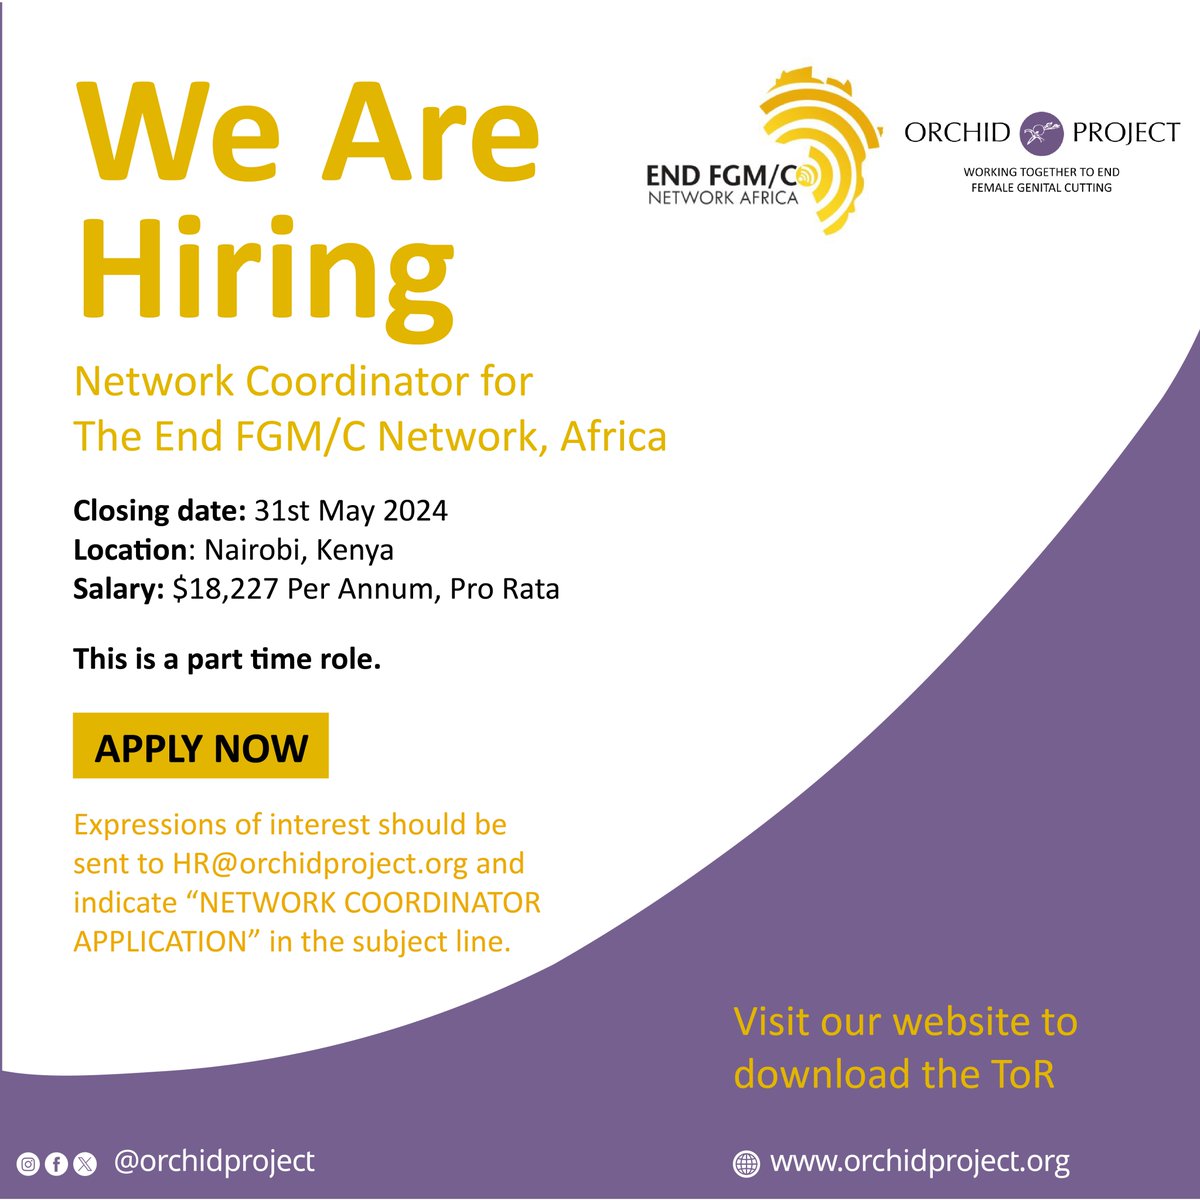 📢We're hiring! The End FGM/C Network, Africa is looking for a Network Coordinator in Nairobi, Kenya! If you have experience in advocacy and project management, apply by 31st May 2024. Visit our website to download the ToR: orchidproject.org/get-involved/j… #EndFGMC #IkoKaziKe